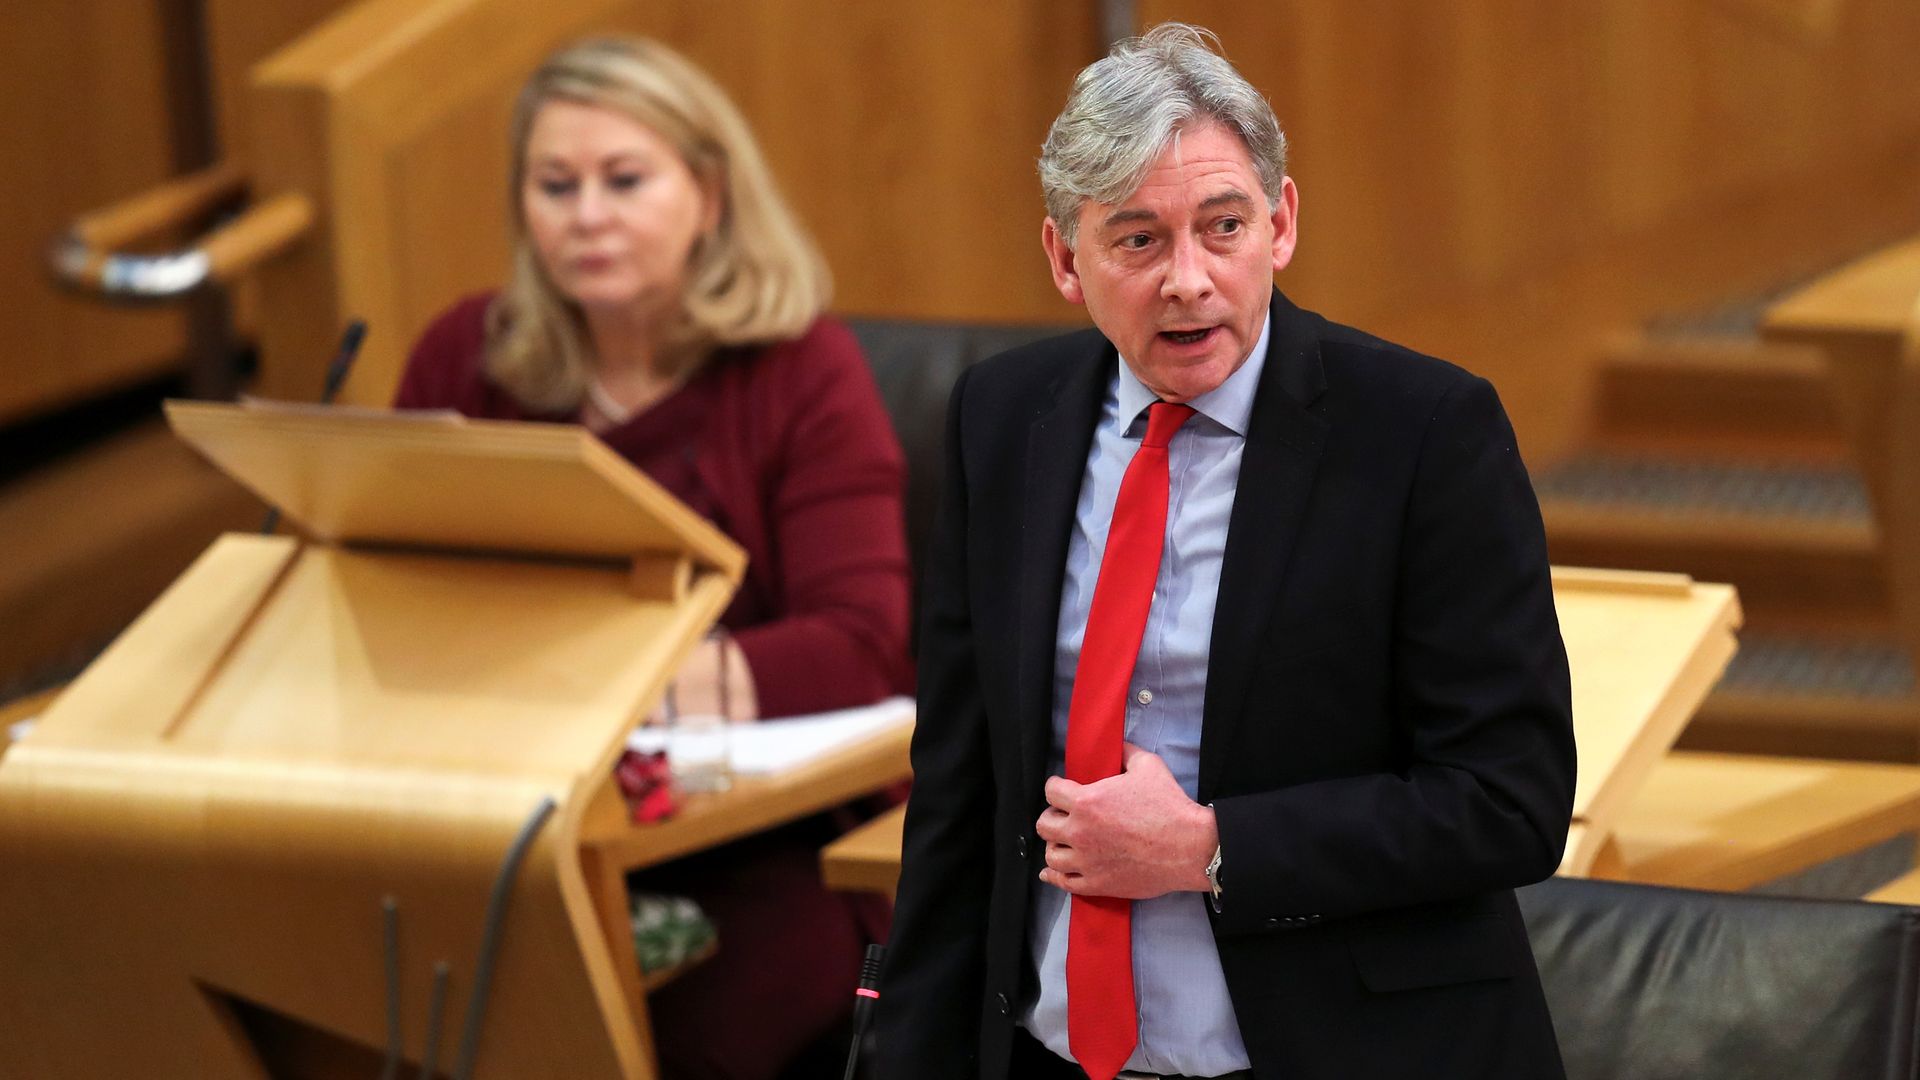 Richard Leonard, leader of the Scottish Labour Party speaks as she attends a statement from Scottish First Minister Nicola Sturgeon on the coronavirus disease (COVID-19) restrictions, at the Scottish Parliament in Edinburgh